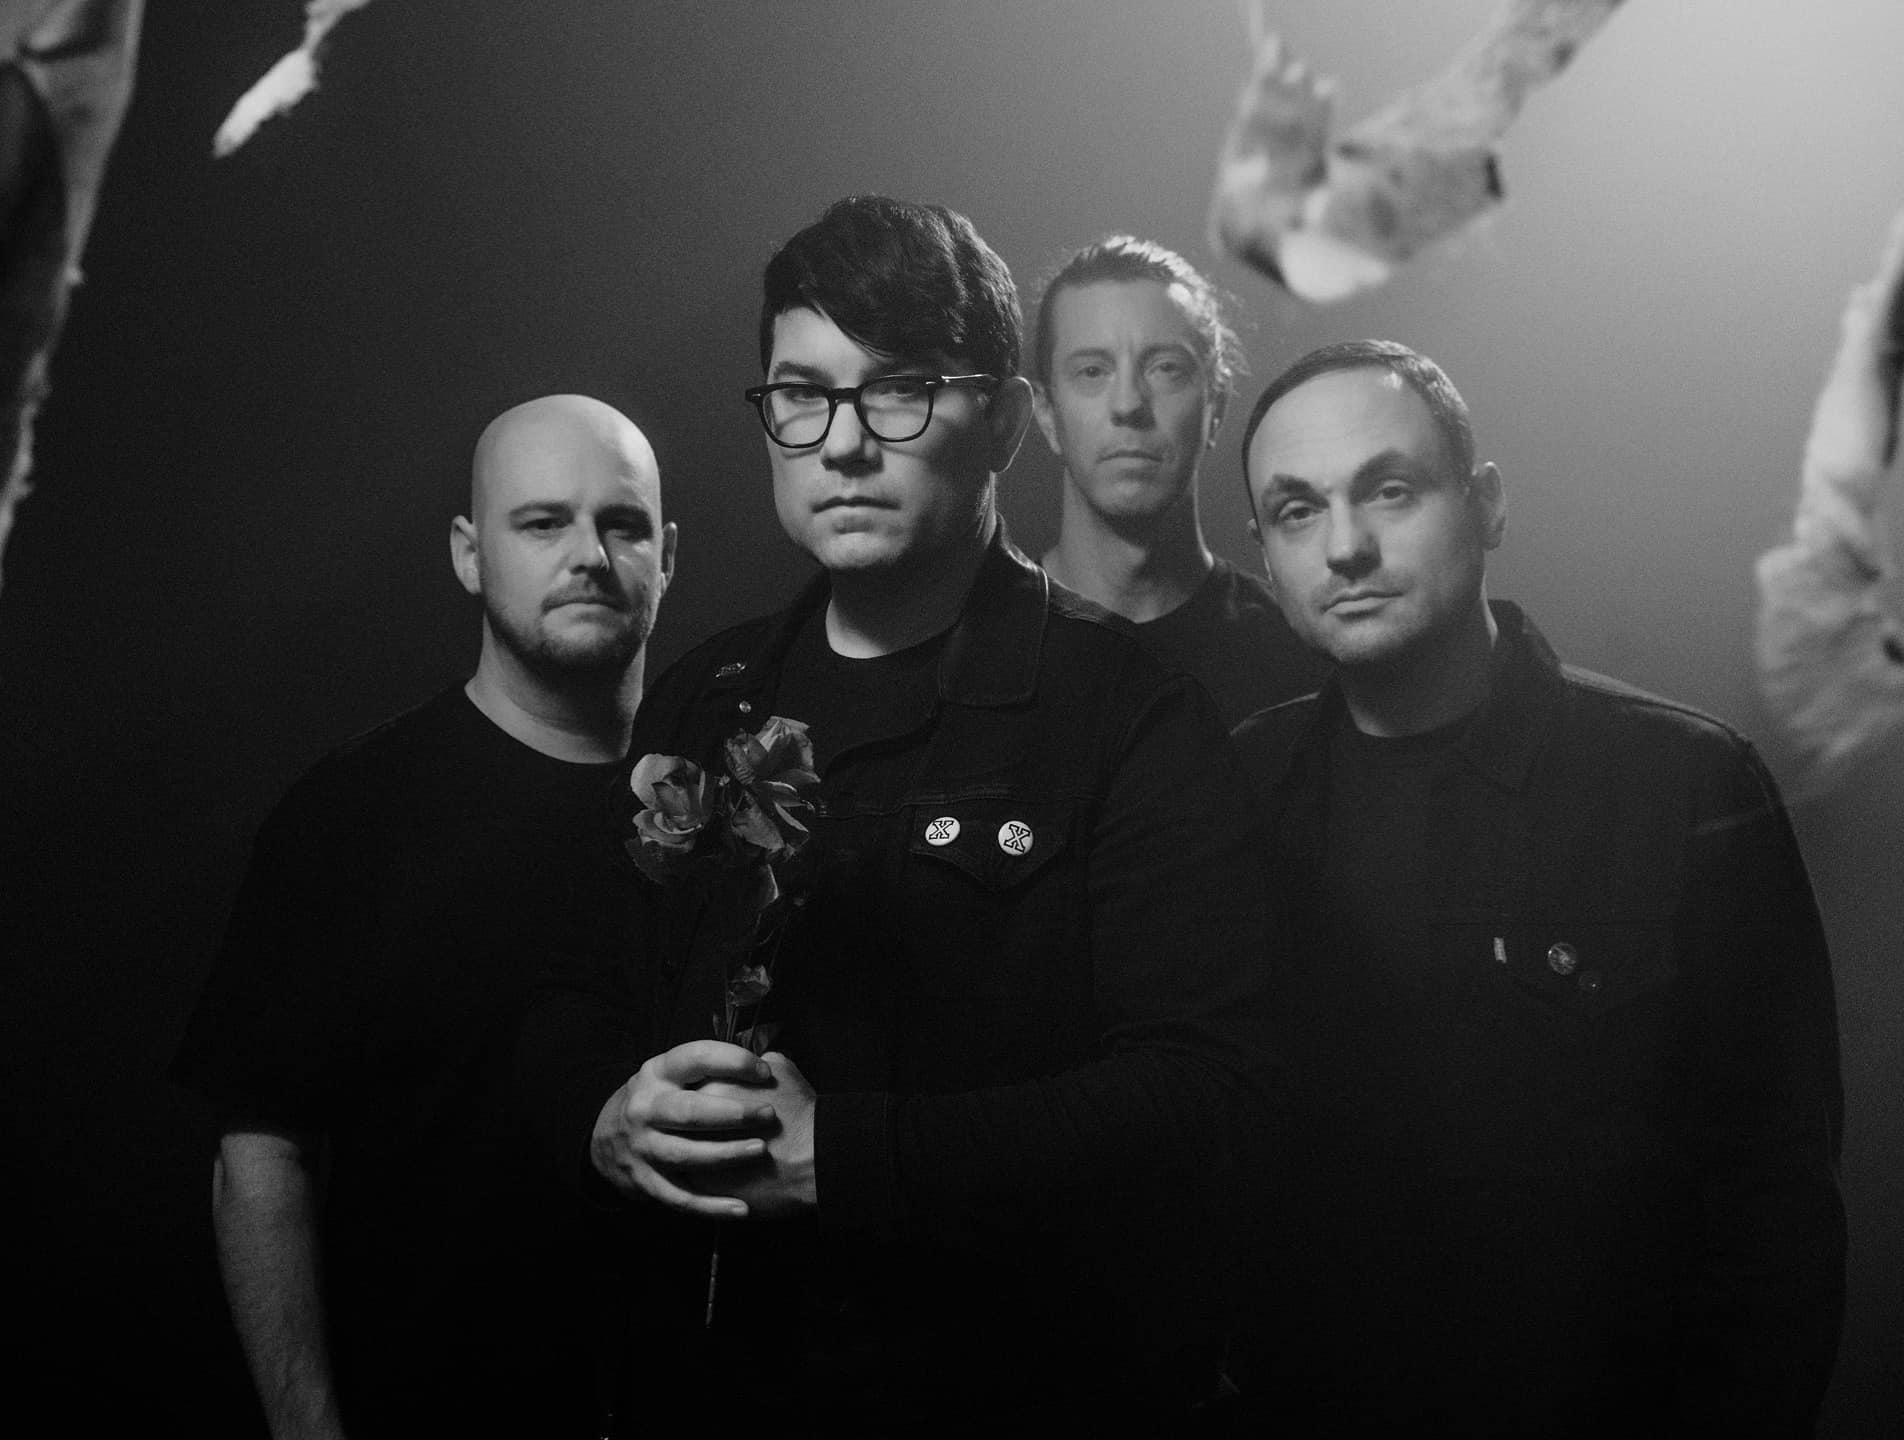 Hawthorne Heights at City Winery Chicago